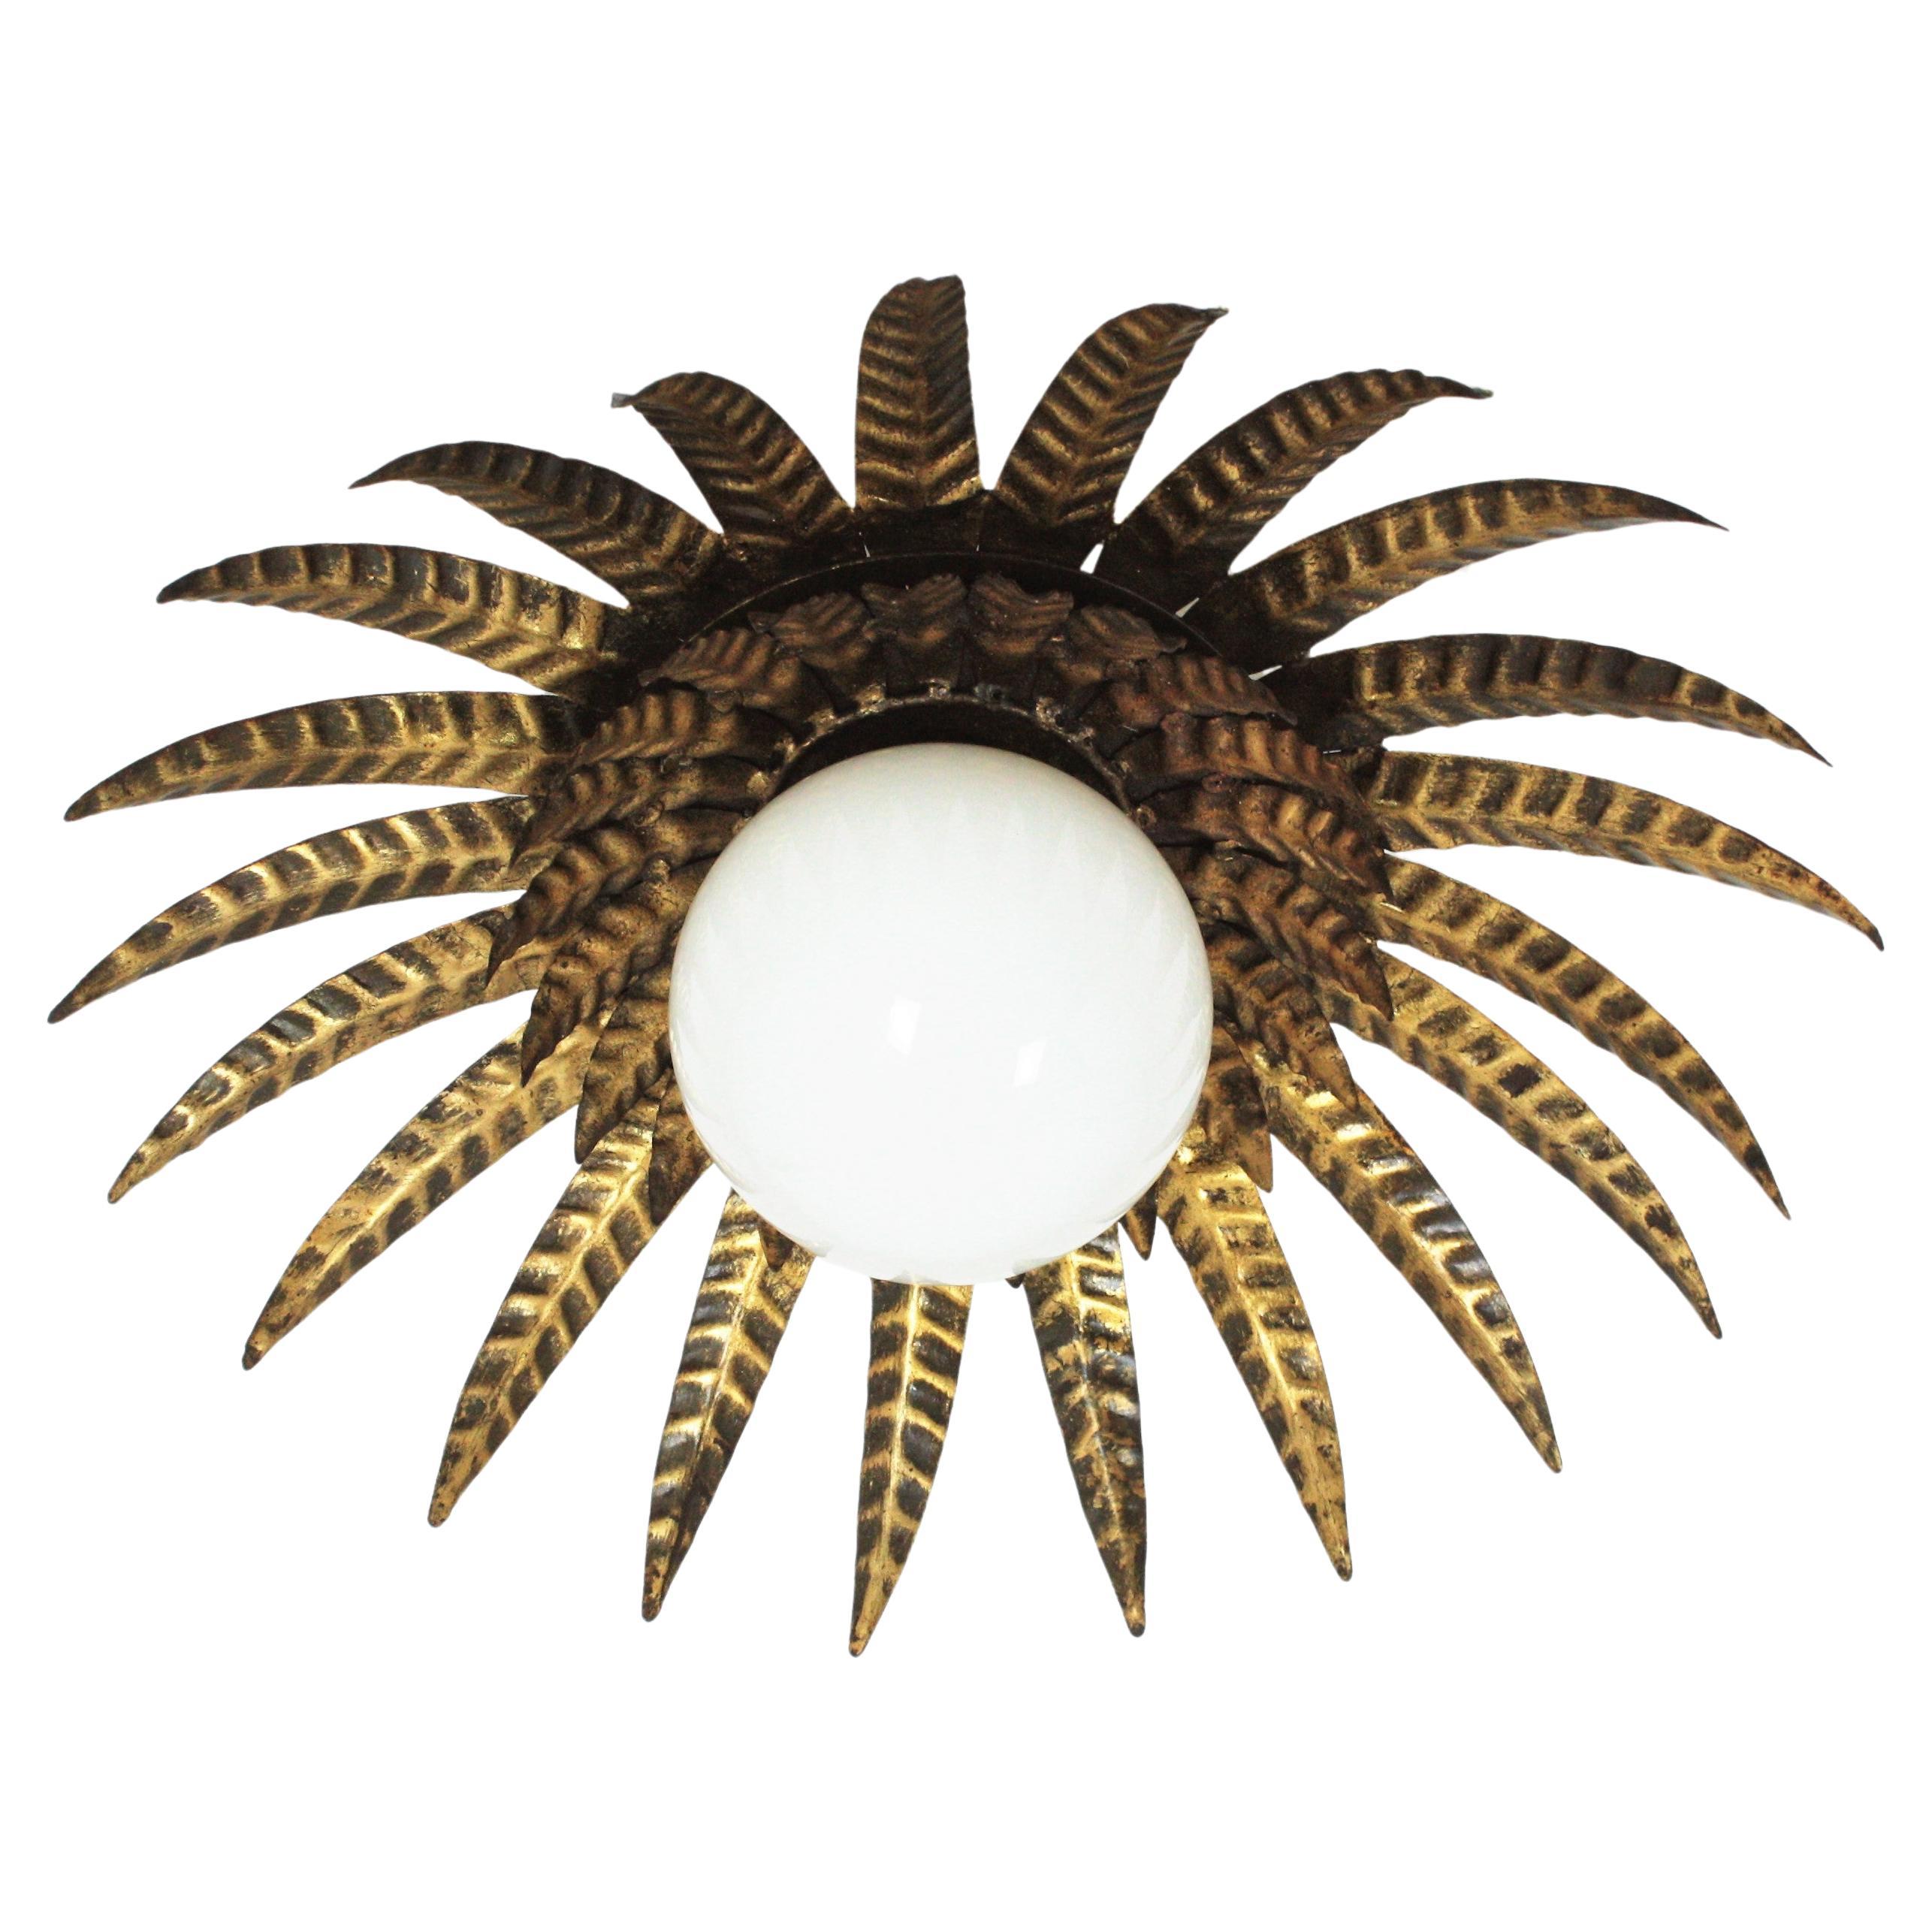 Gorgeous Brutalist gilt iron sunburst flush mount with opaline glass globe, France, 1950s.
This sunburst light fixture features a double layer of leaves / rays surrounding a central milk glass globe shade.
This ceiling flush mount combines